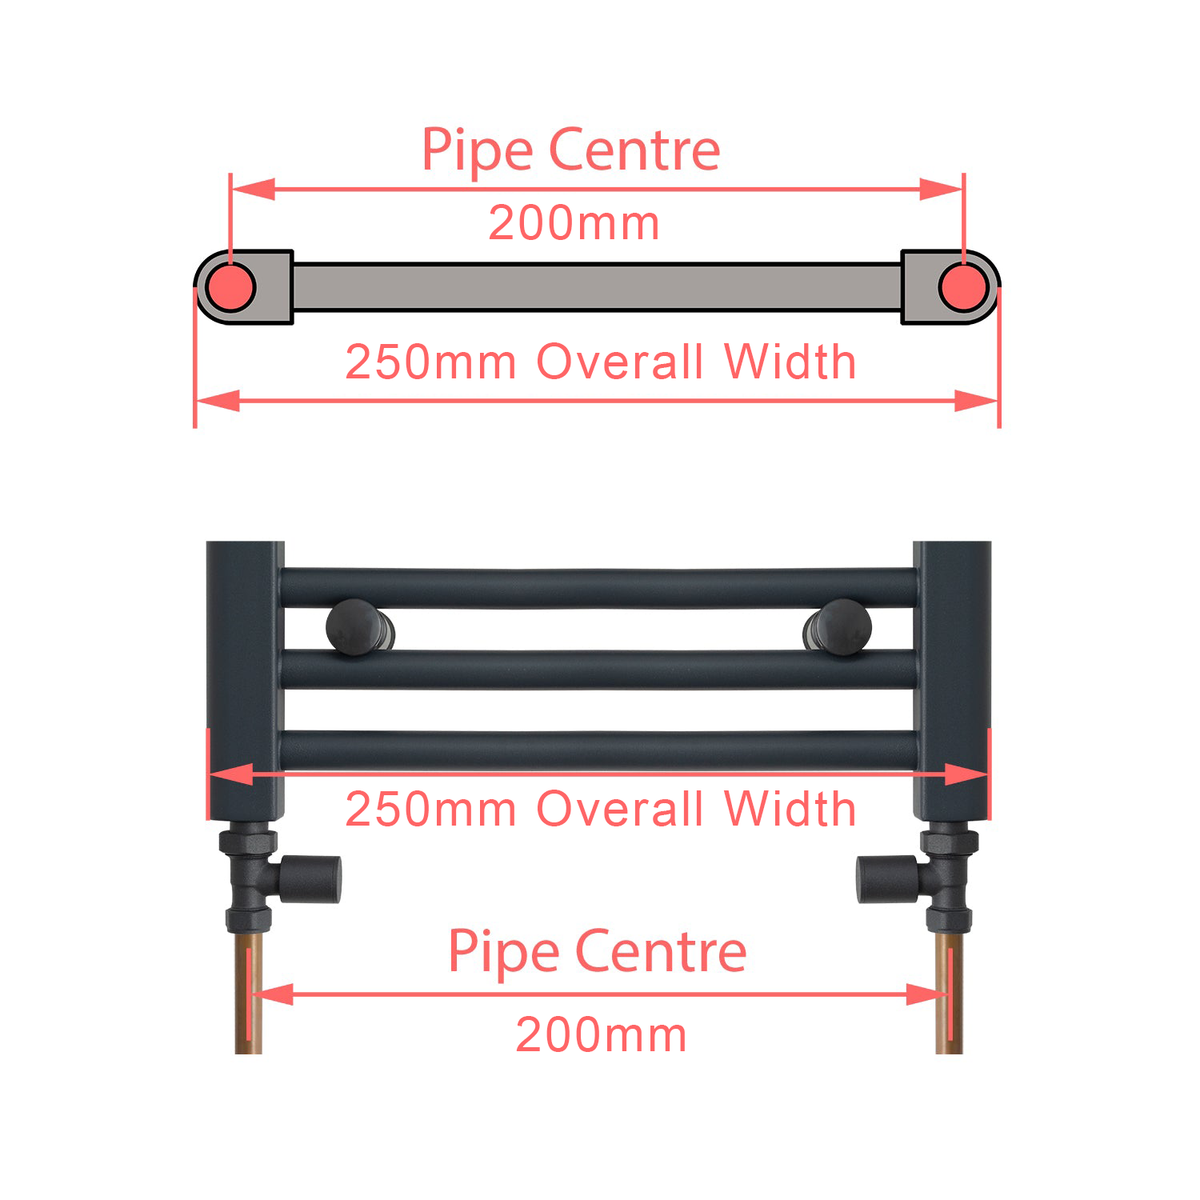 250mm wide pipe center